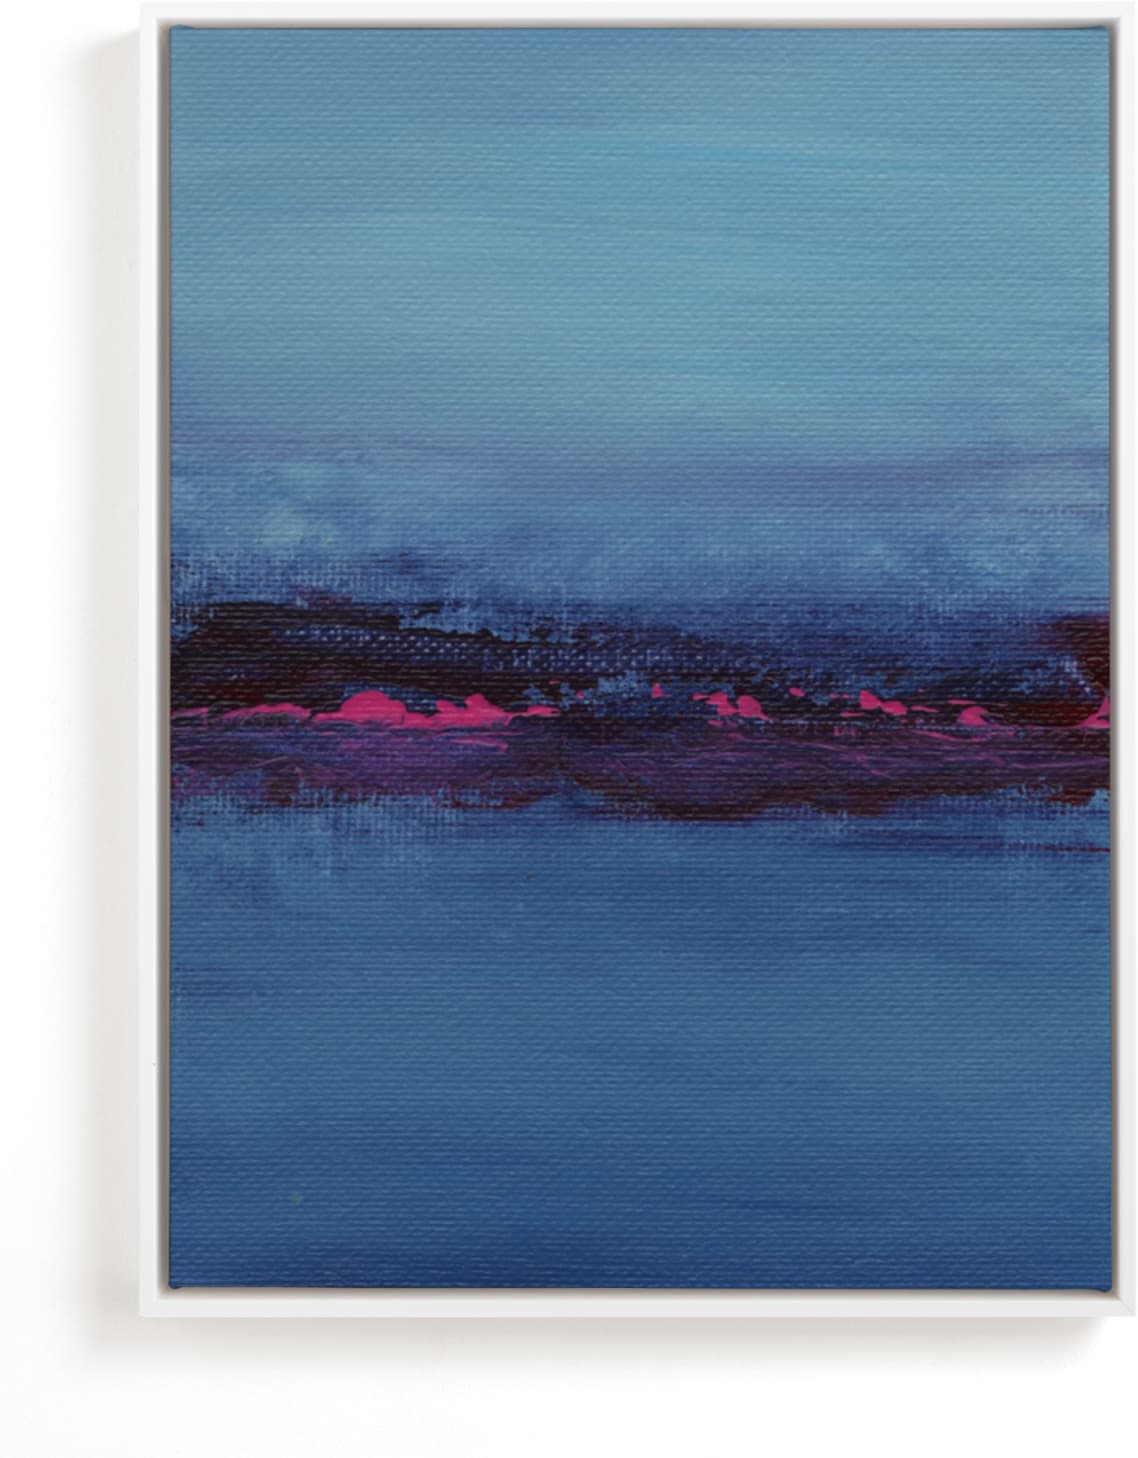 This is a blue art by Lindsay Megahed called Lights on the Lake.